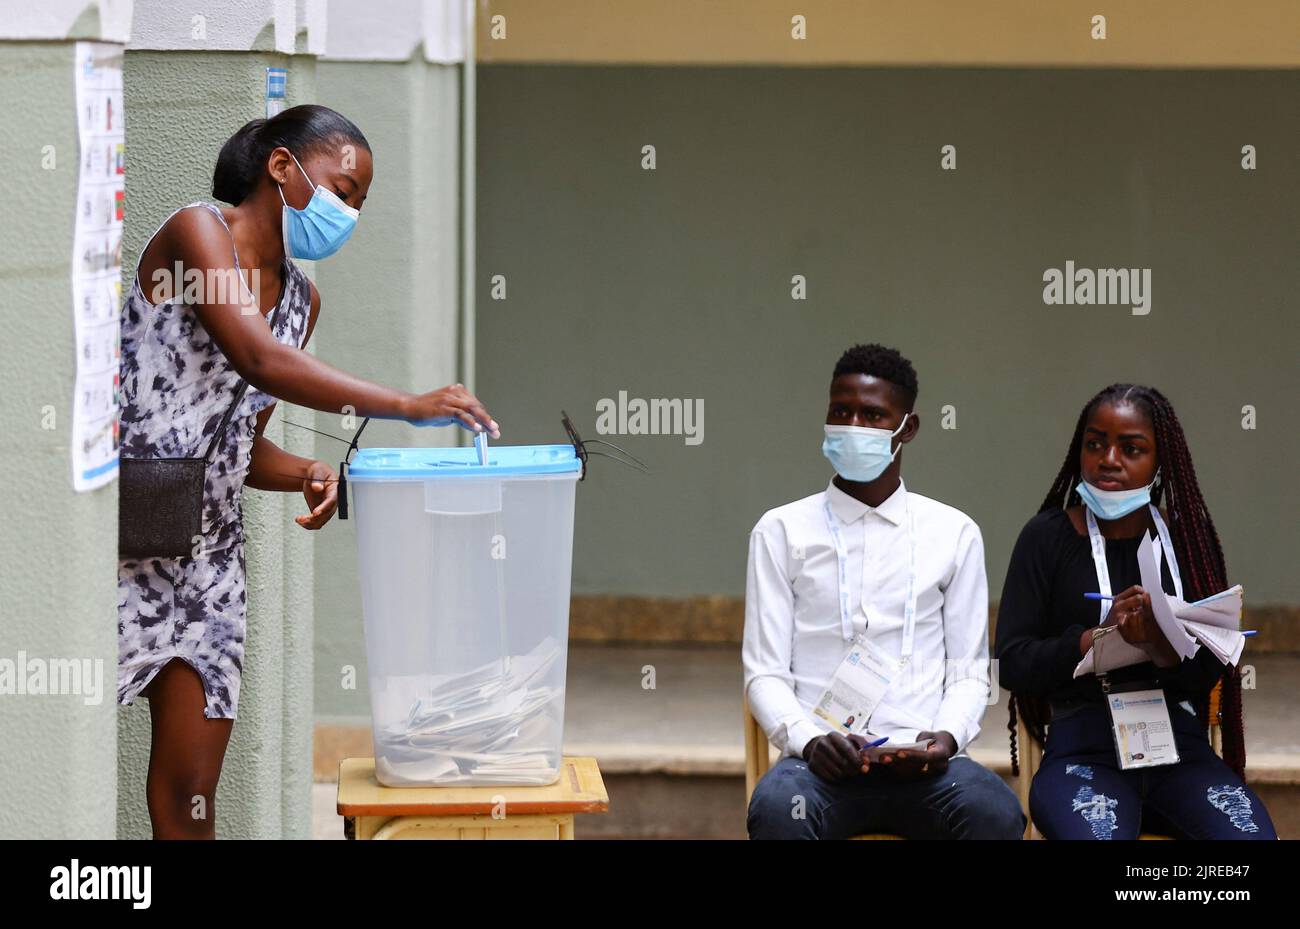 A woman casts her vote while election officials look on during the general election at Nzinga Mbandi school in the capital Luanda, Angola August 24, 2022. REUTERS/Siphiwe Sibeko Stock Photo